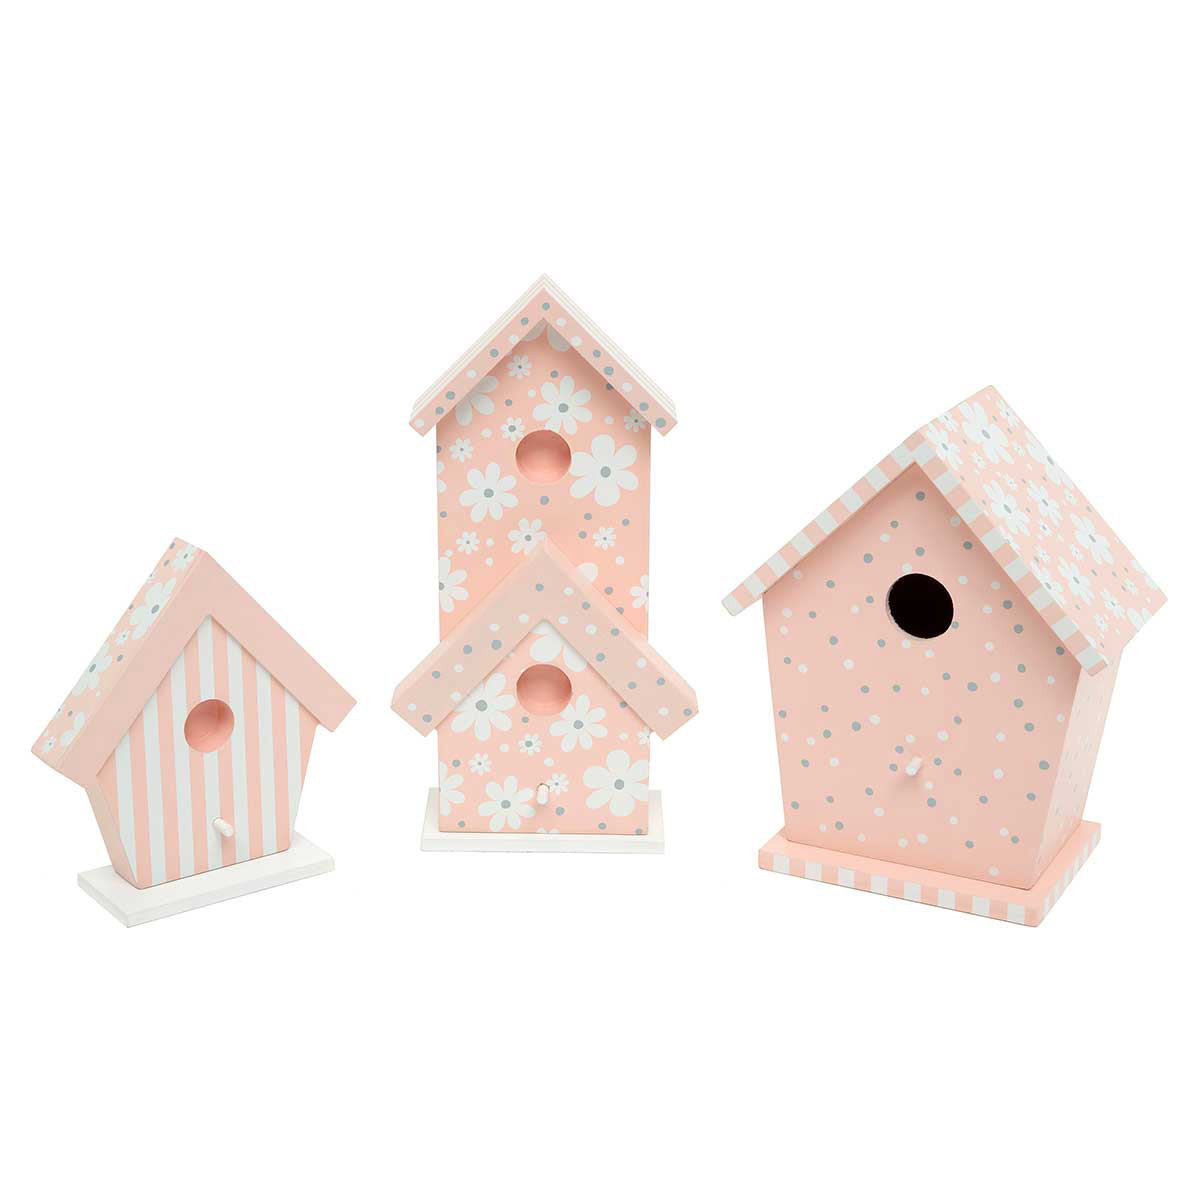 b50 BIRDHOUSE WHOOPSIE PINDOT 6.5IN X 4IN X 8IN WOOD - Click Image to Close